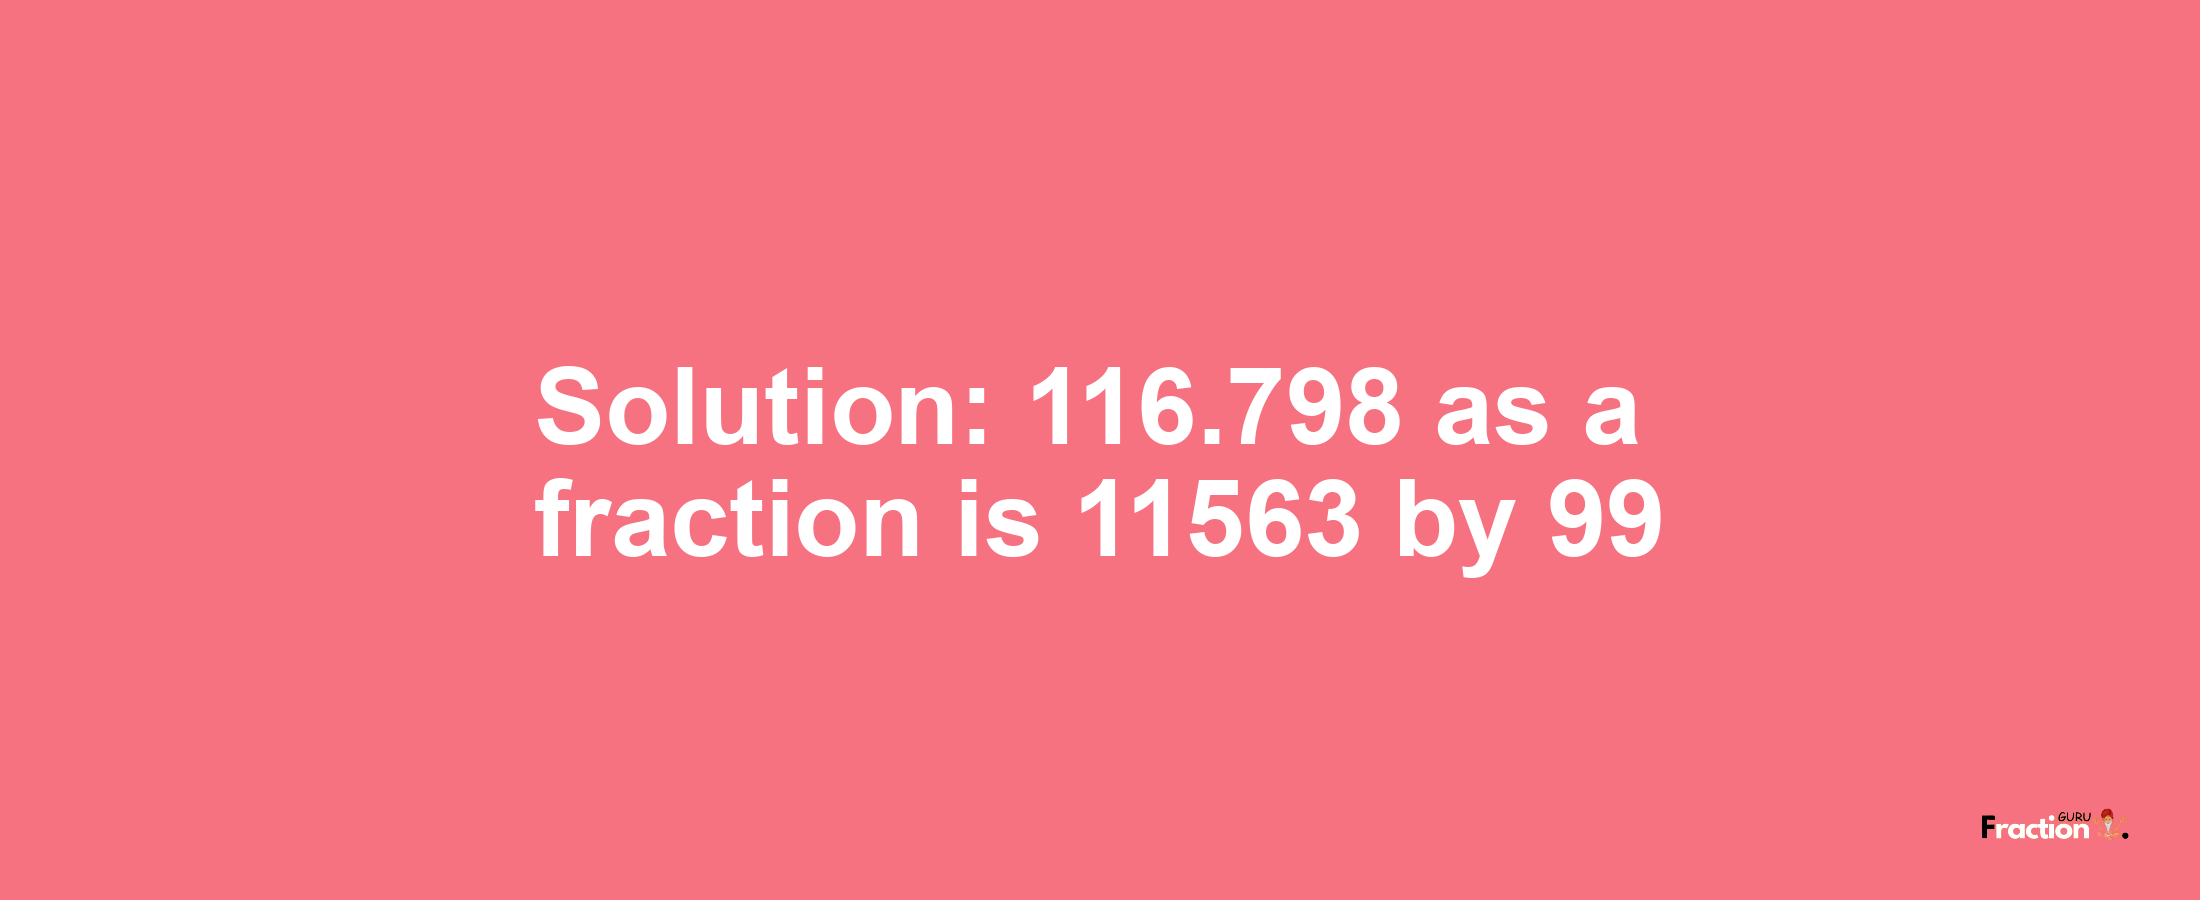 Solution:116.798 as a fraction is 11563/99